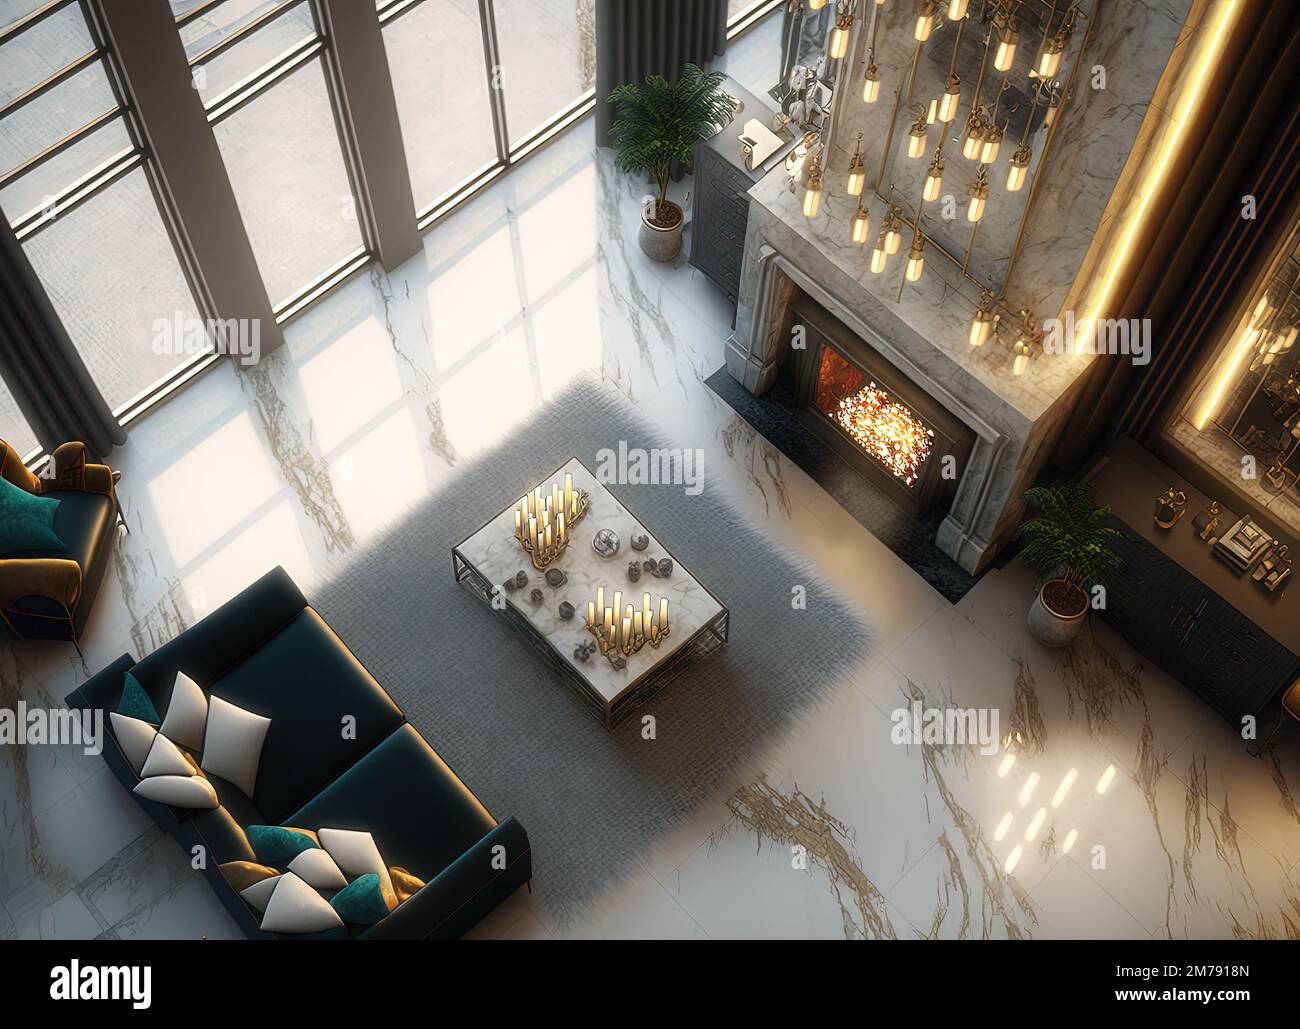 Top view interior design of luxury Lavish apartment with marble floor, high ceilings and high glass windows. Art deco concept. Stock Photo